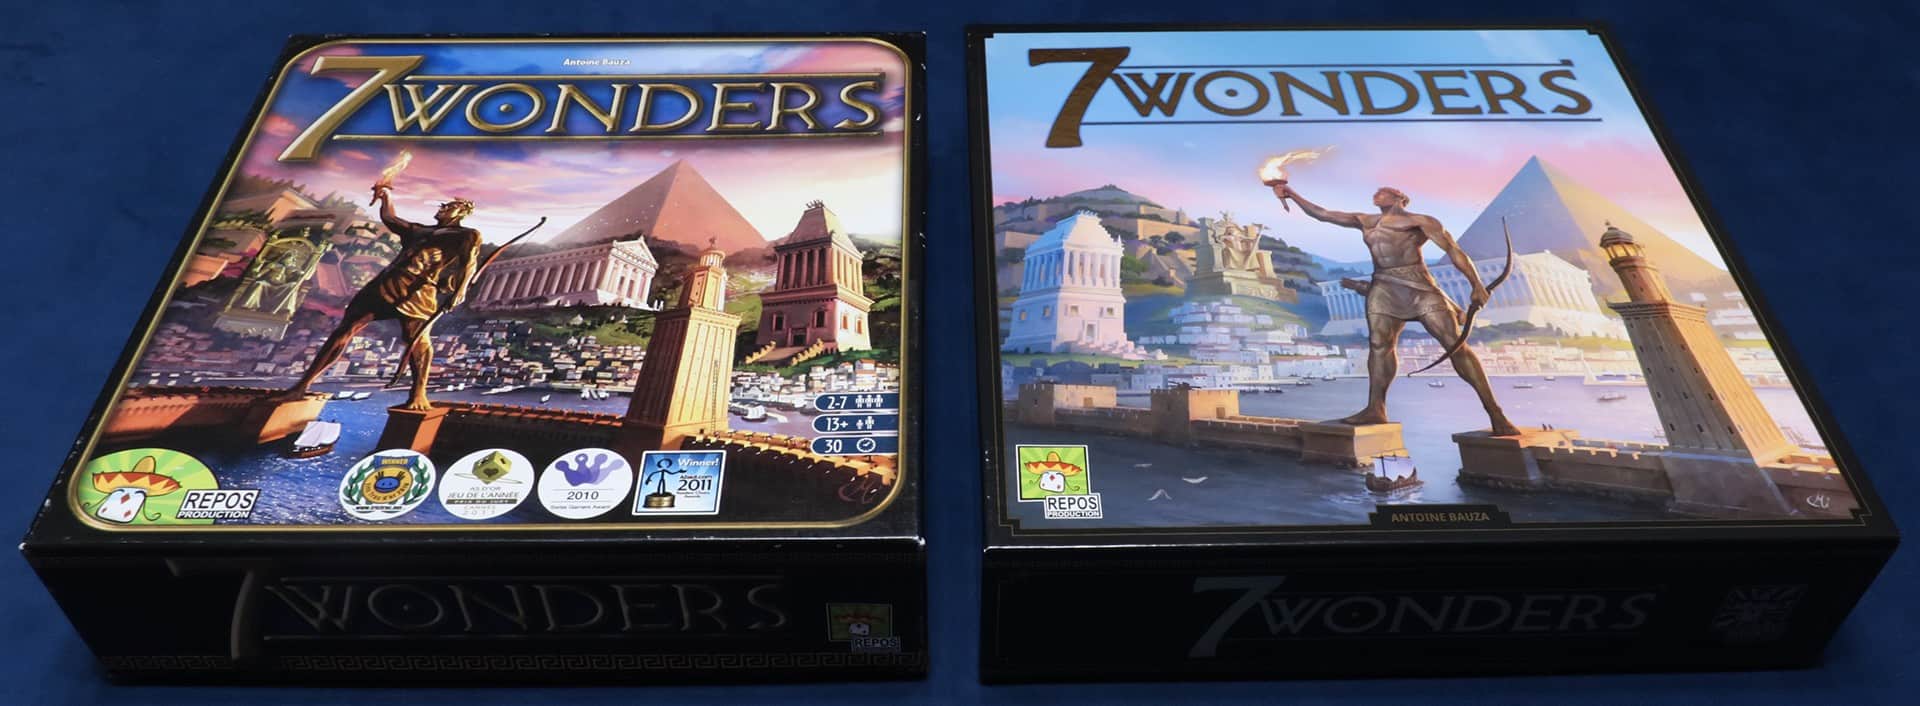 7 Wonders 1st edition and 2nd edition